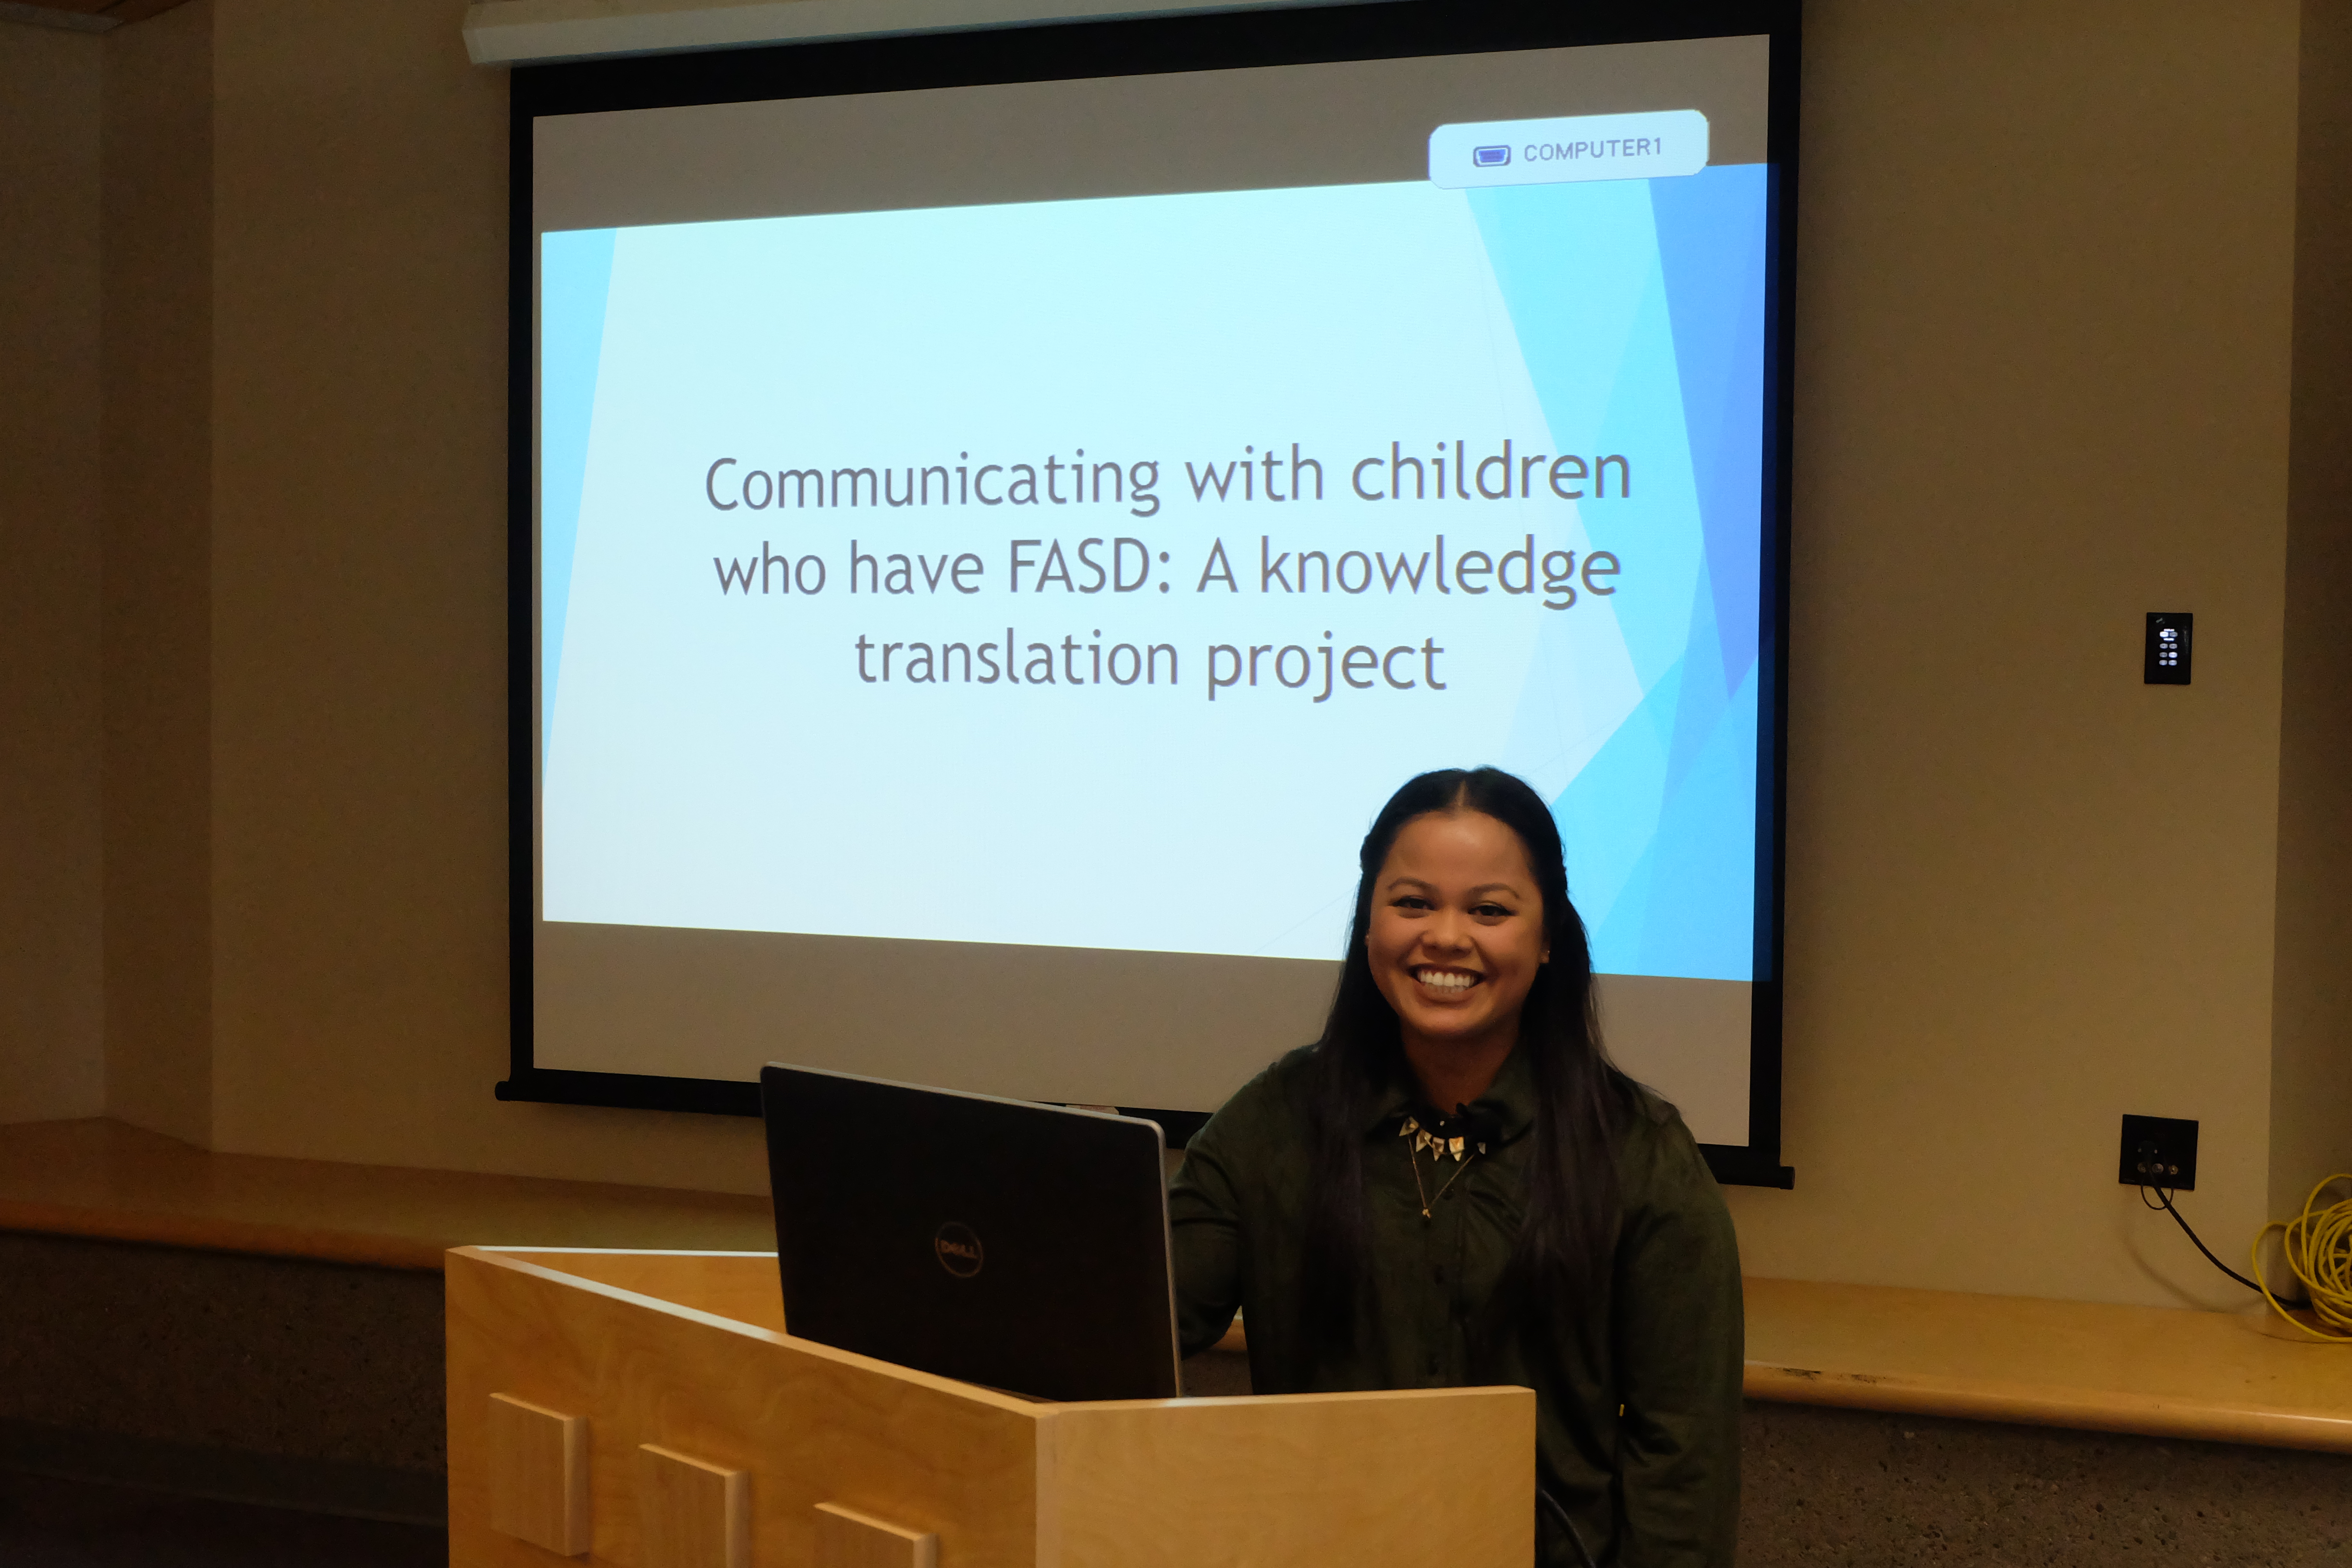 Gabrielle Barredo: Communicating with children who have FASD: A knowledge translation project